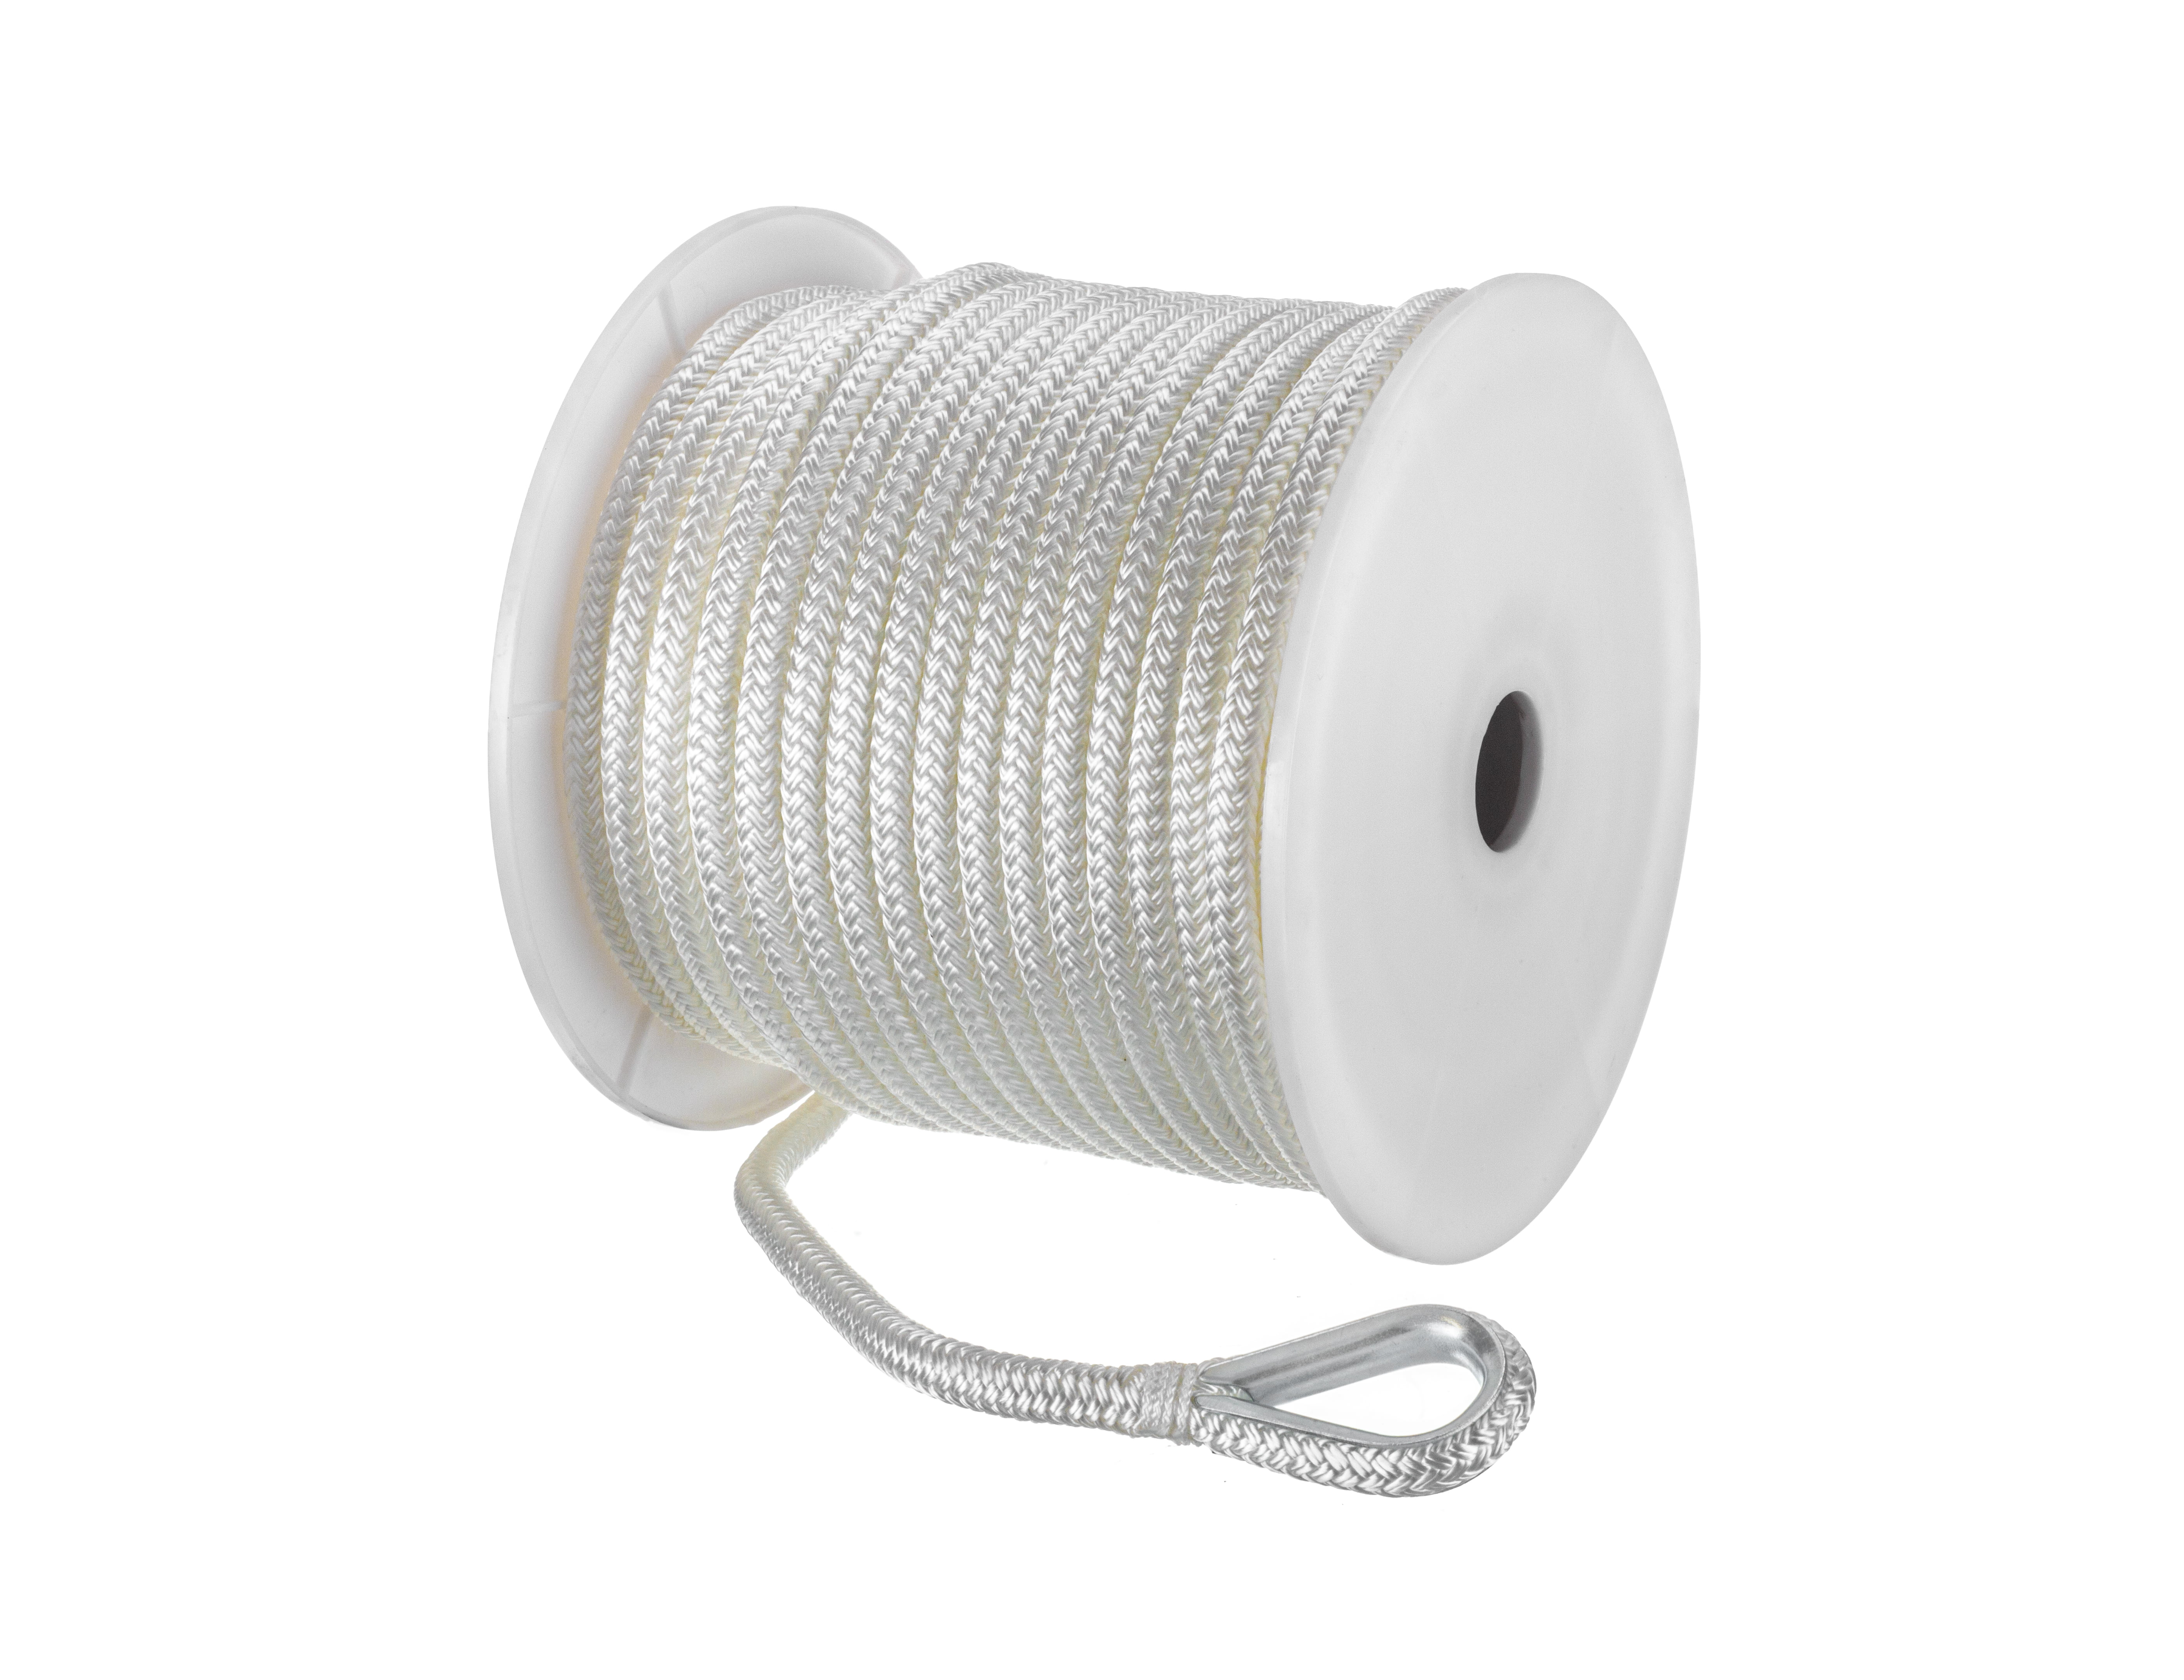 ⅝-Inch x 250 Feet Double Braid Nylon Anchor Line Seachoice 42311 Anchor Rope for Boating Gold/White 